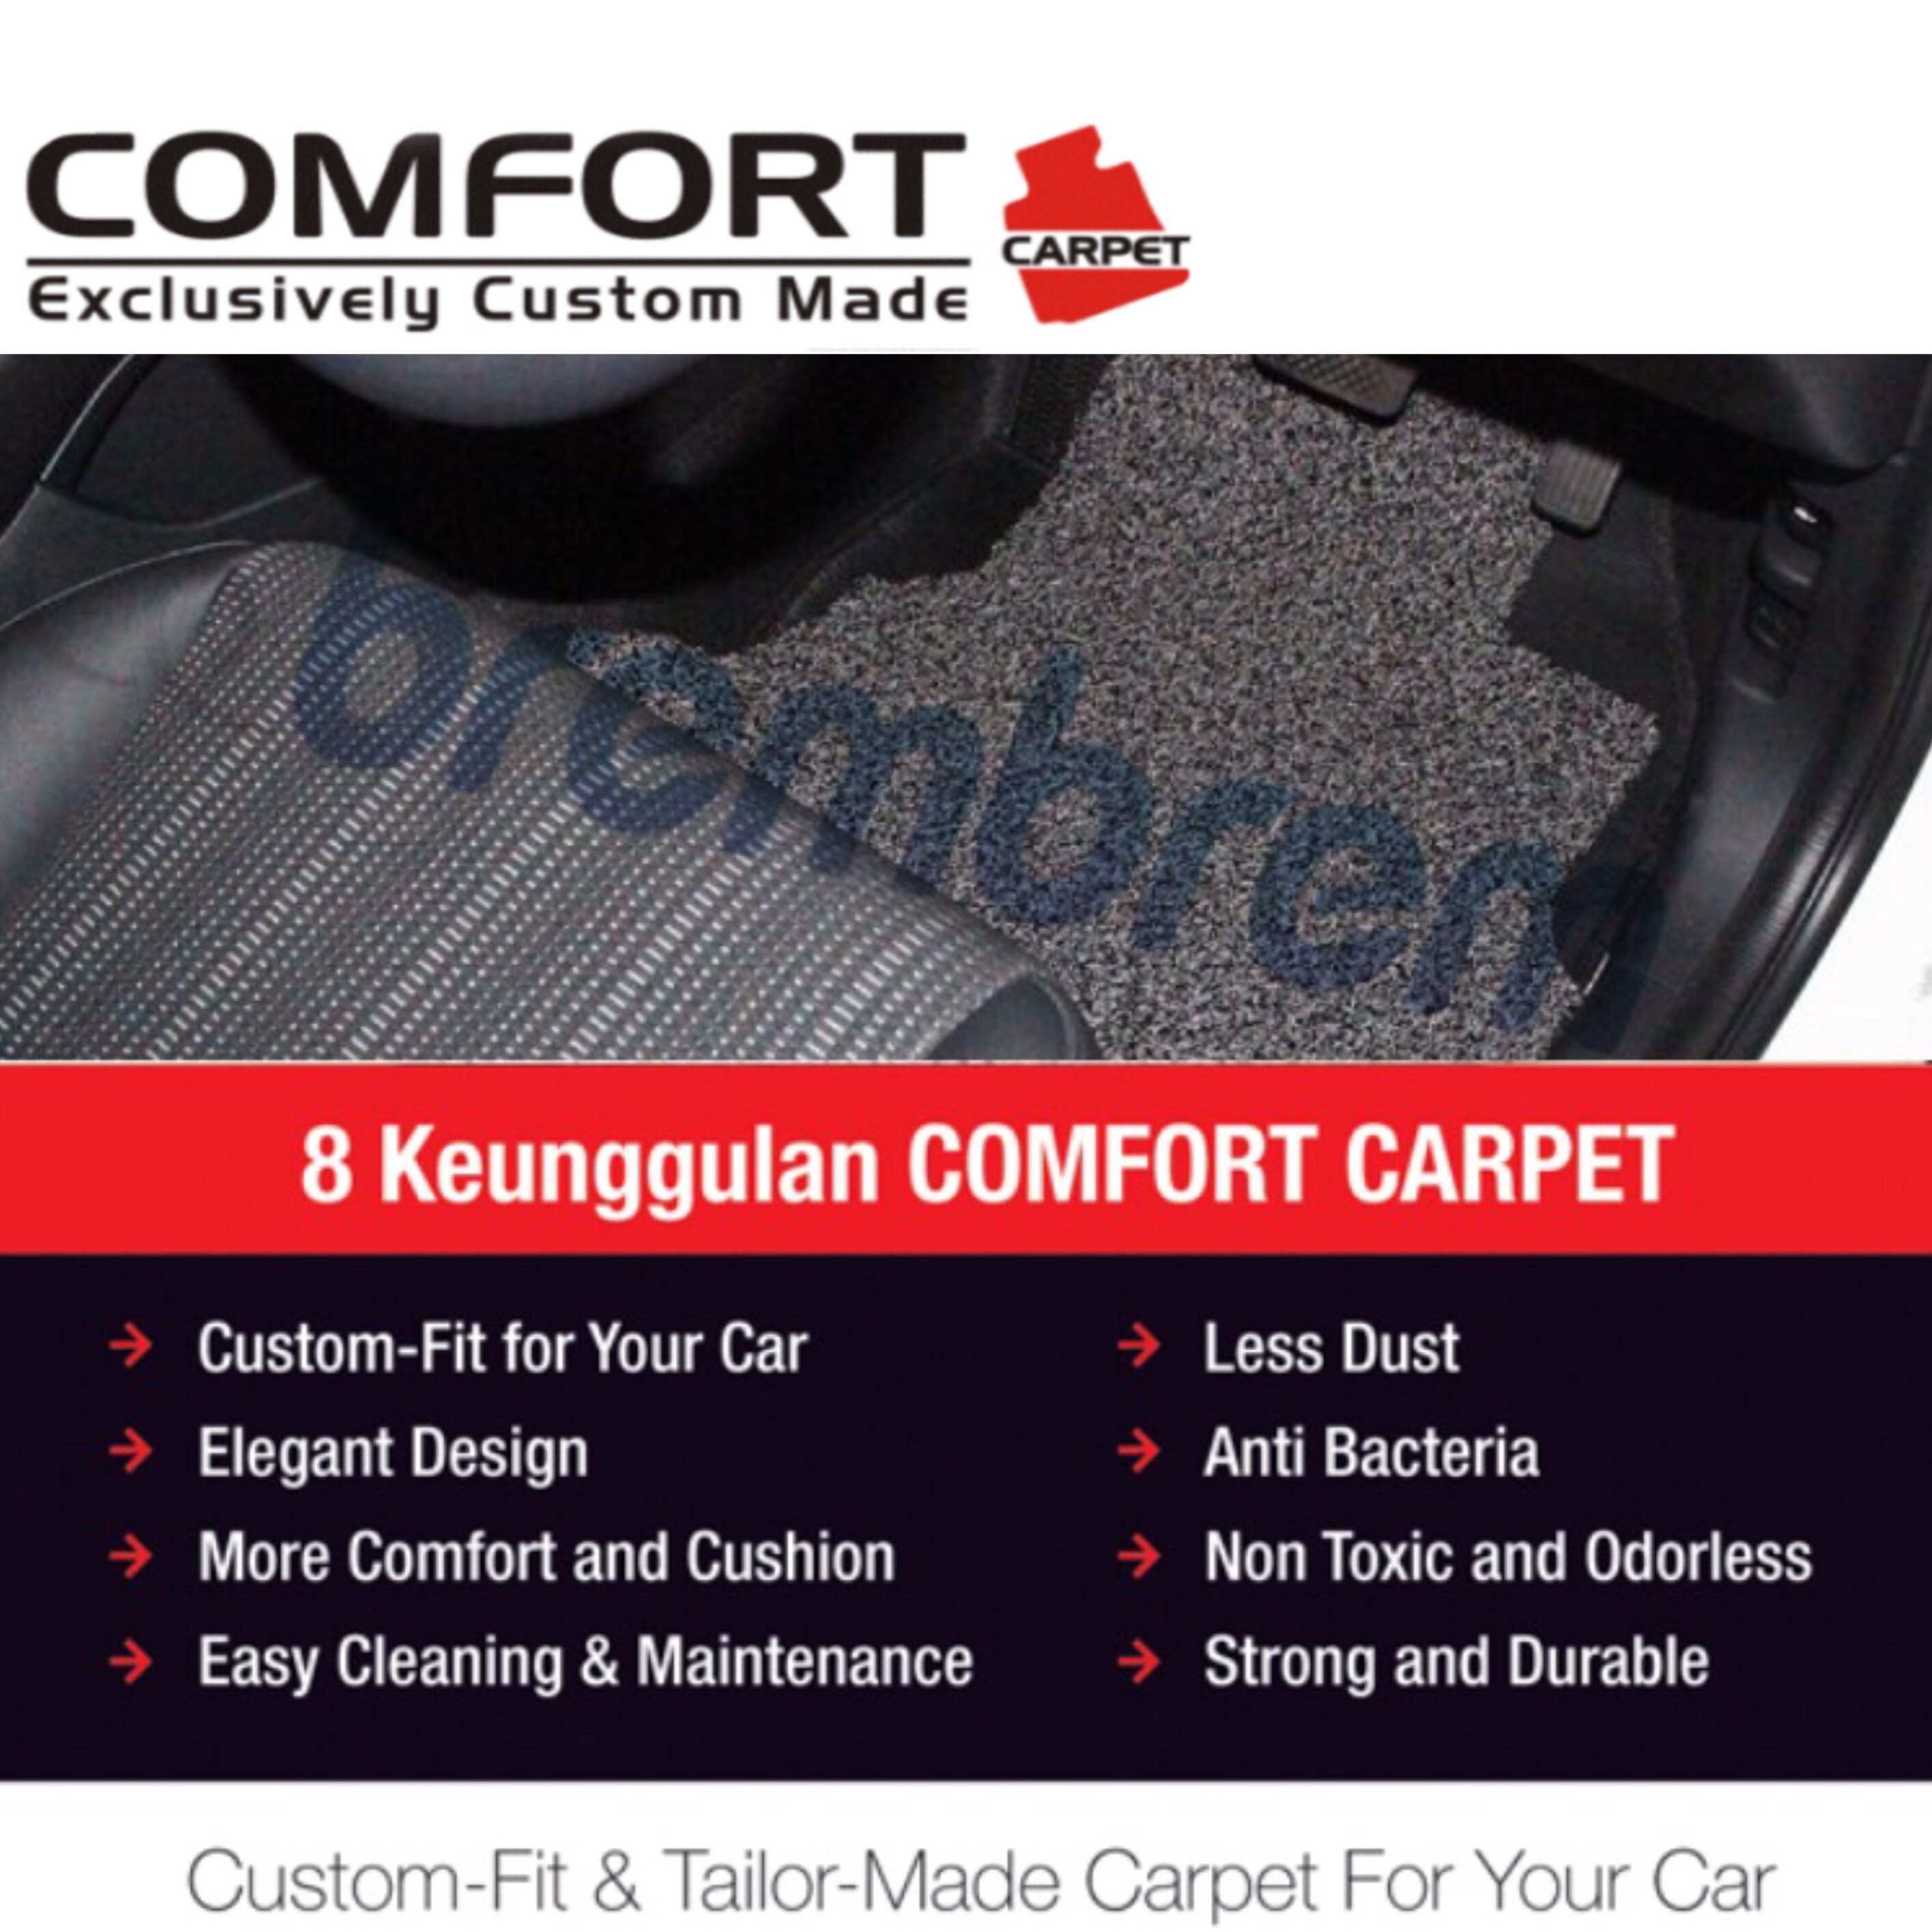 KARPET COMFORT DELUXE NON BAGASI - TOYOTA CAMRY 2019 